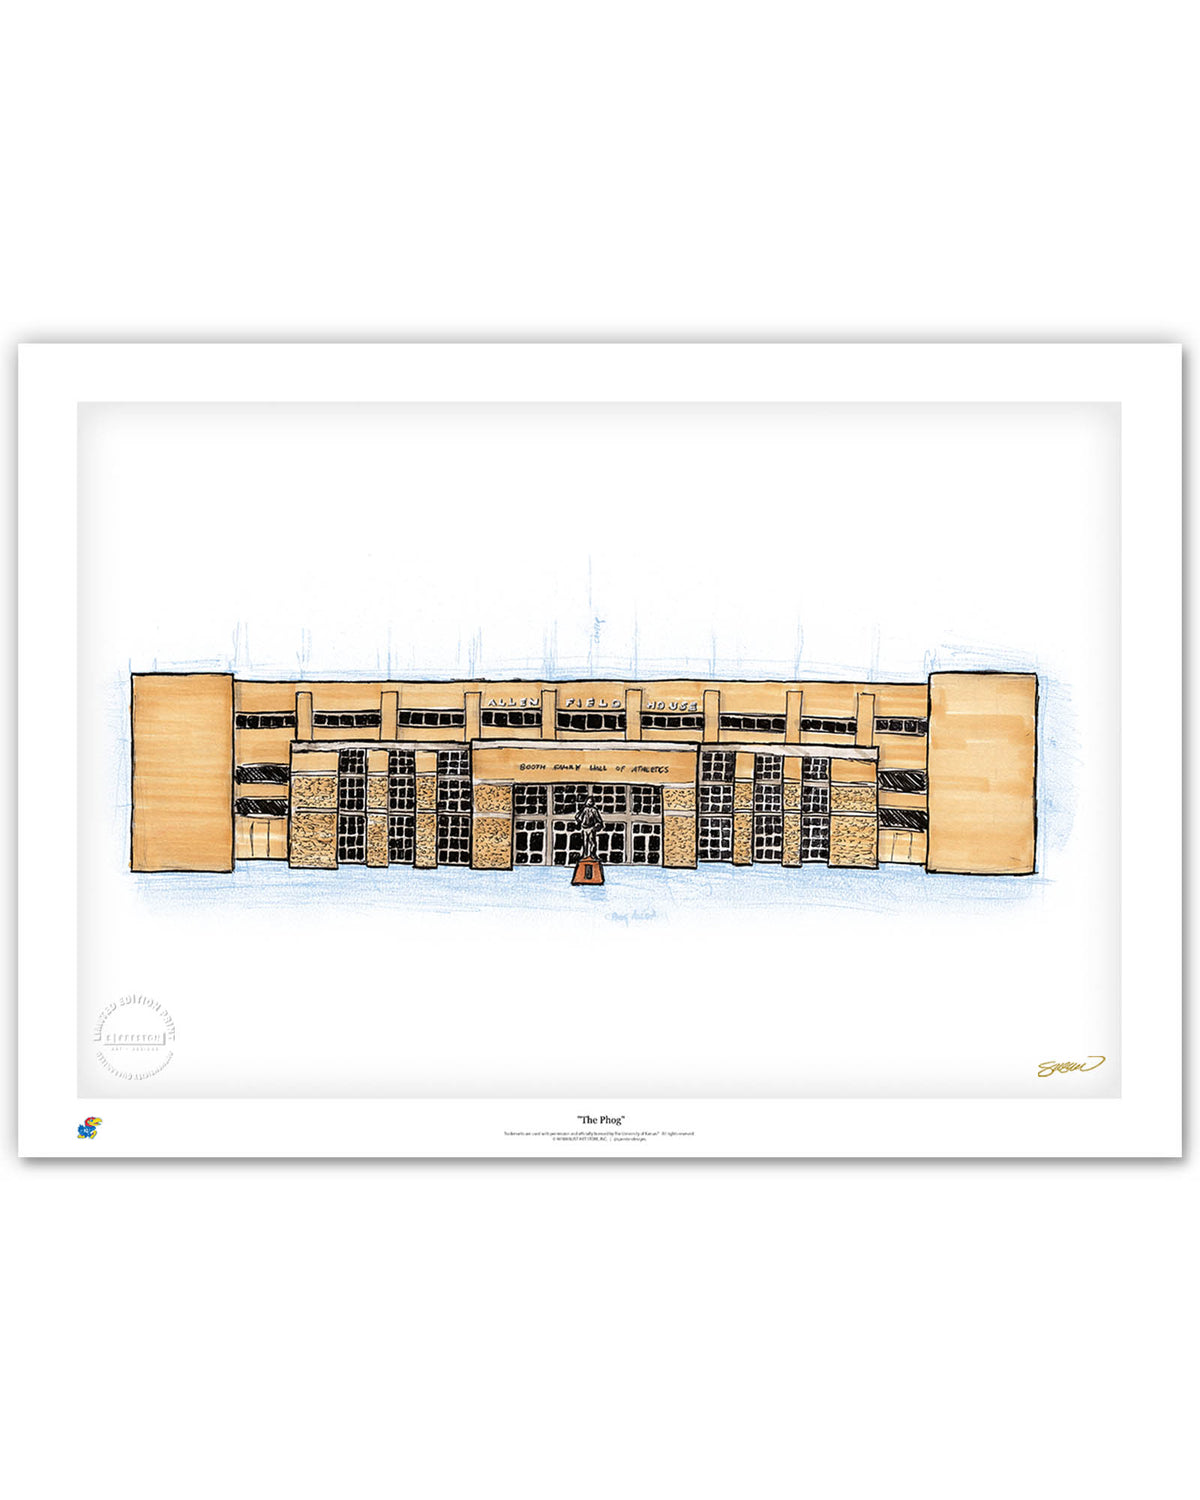 The Fog - Allen Fieldhouse Limited Edition Sketch Print